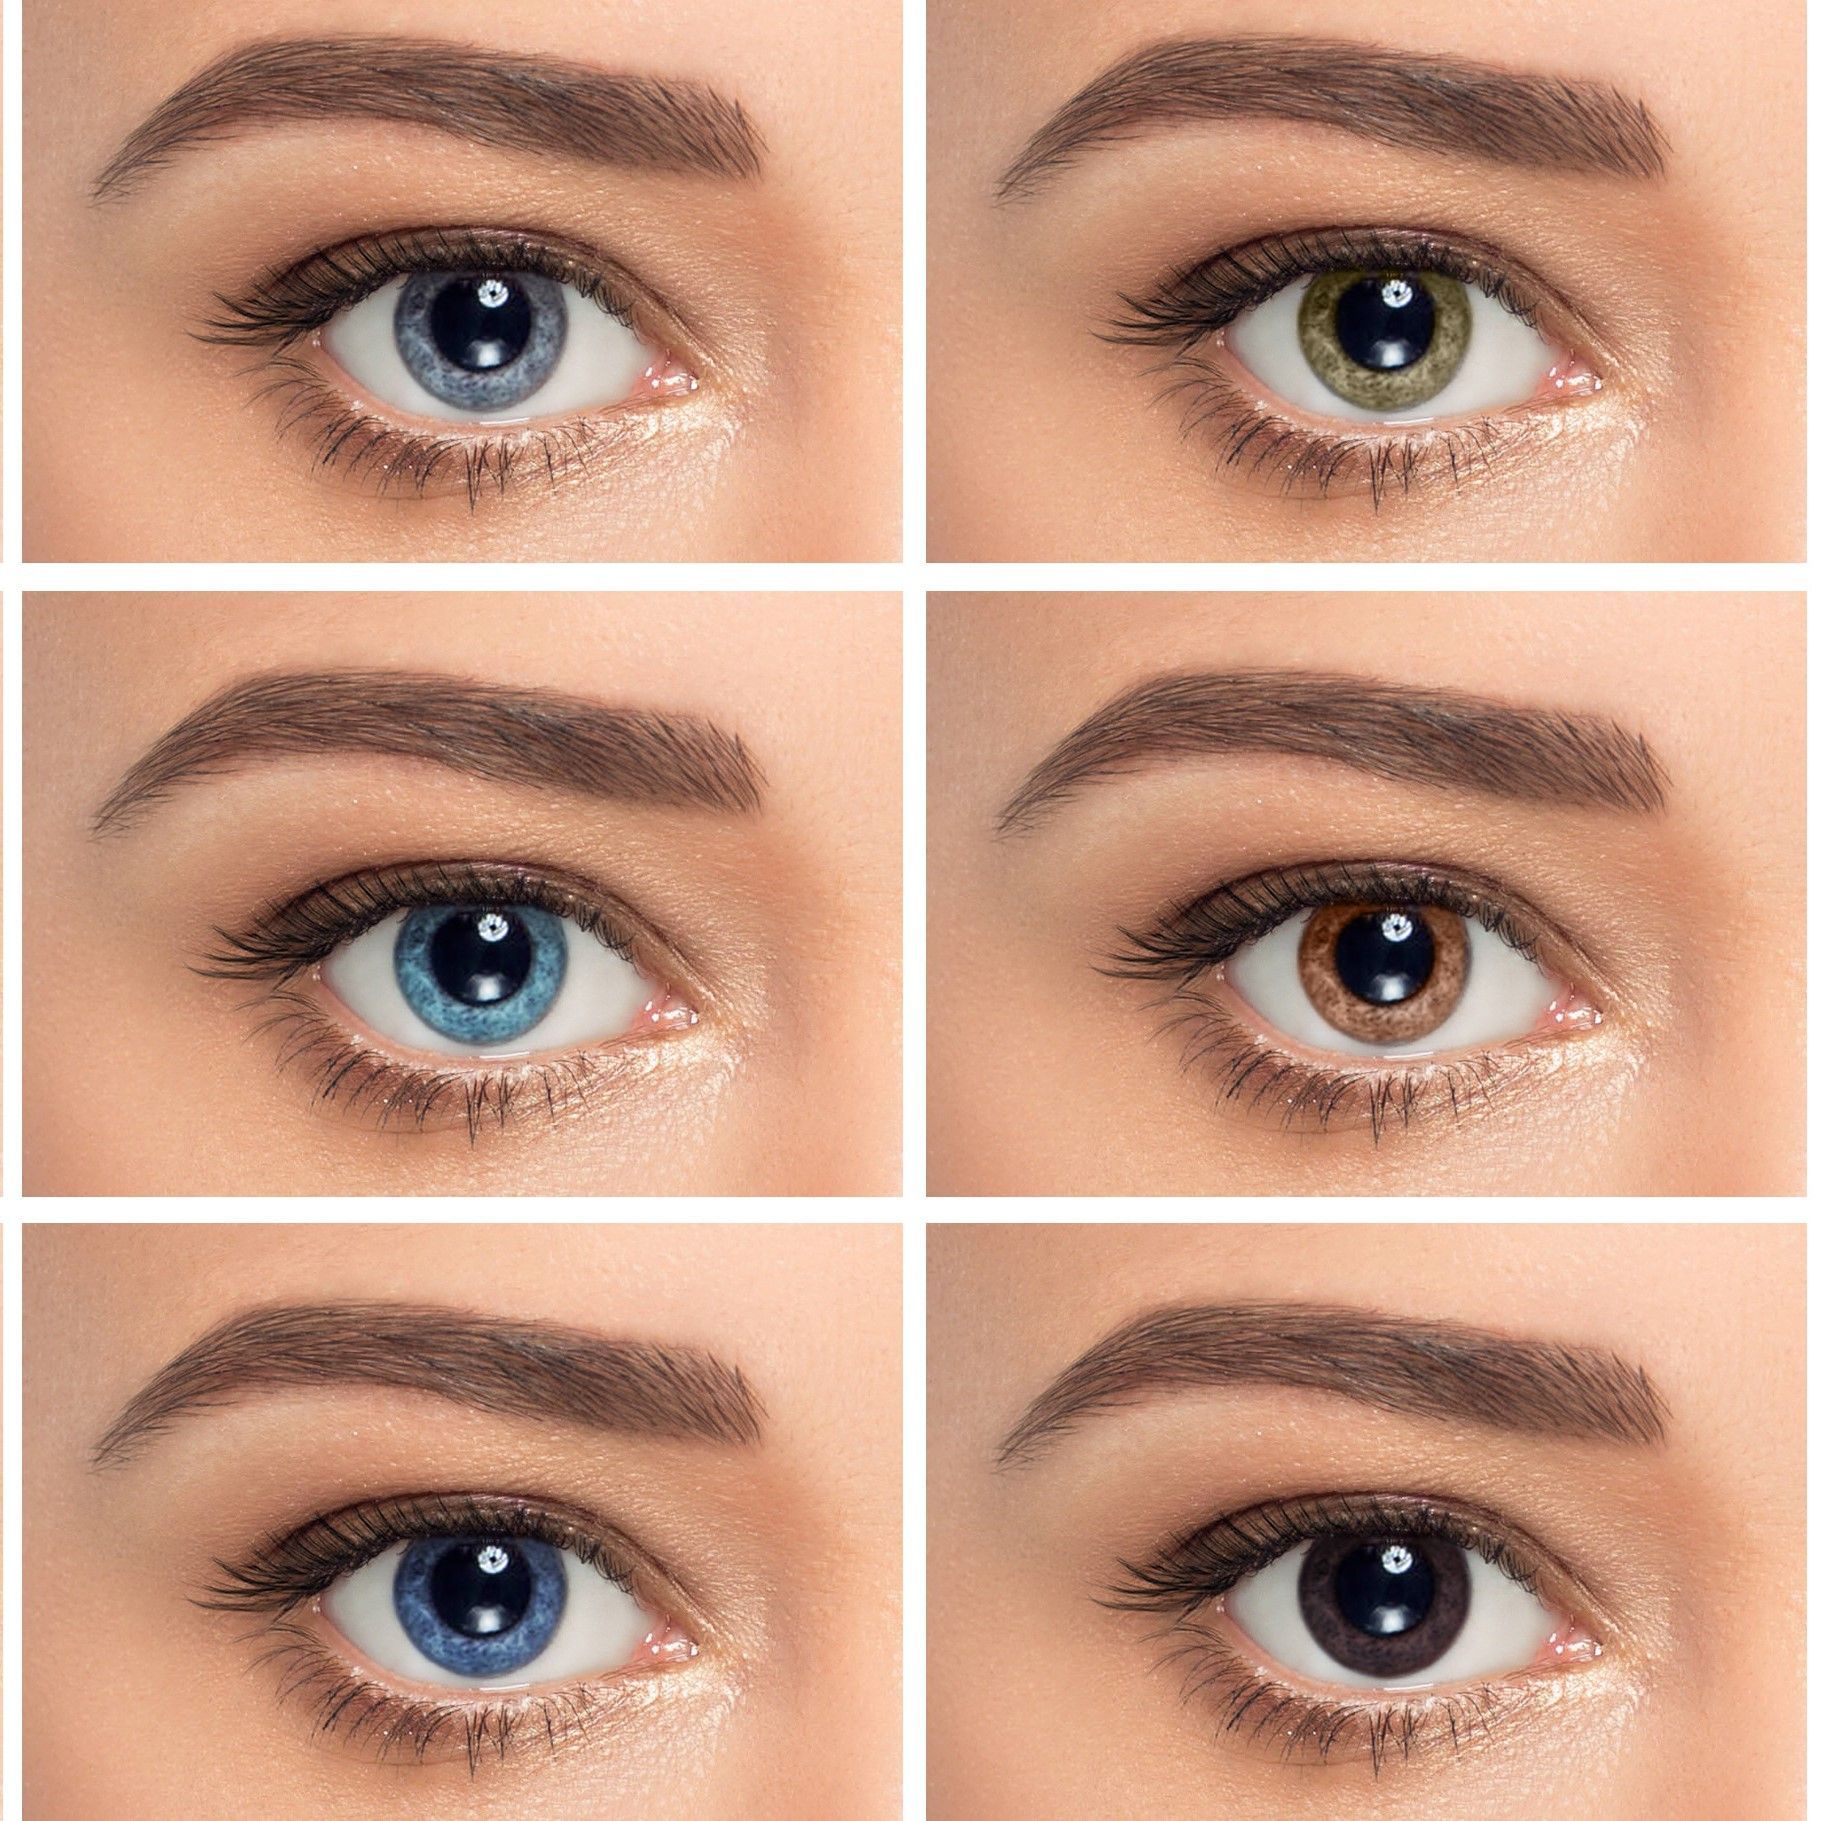 Coloured contact lenses are designed to correct your